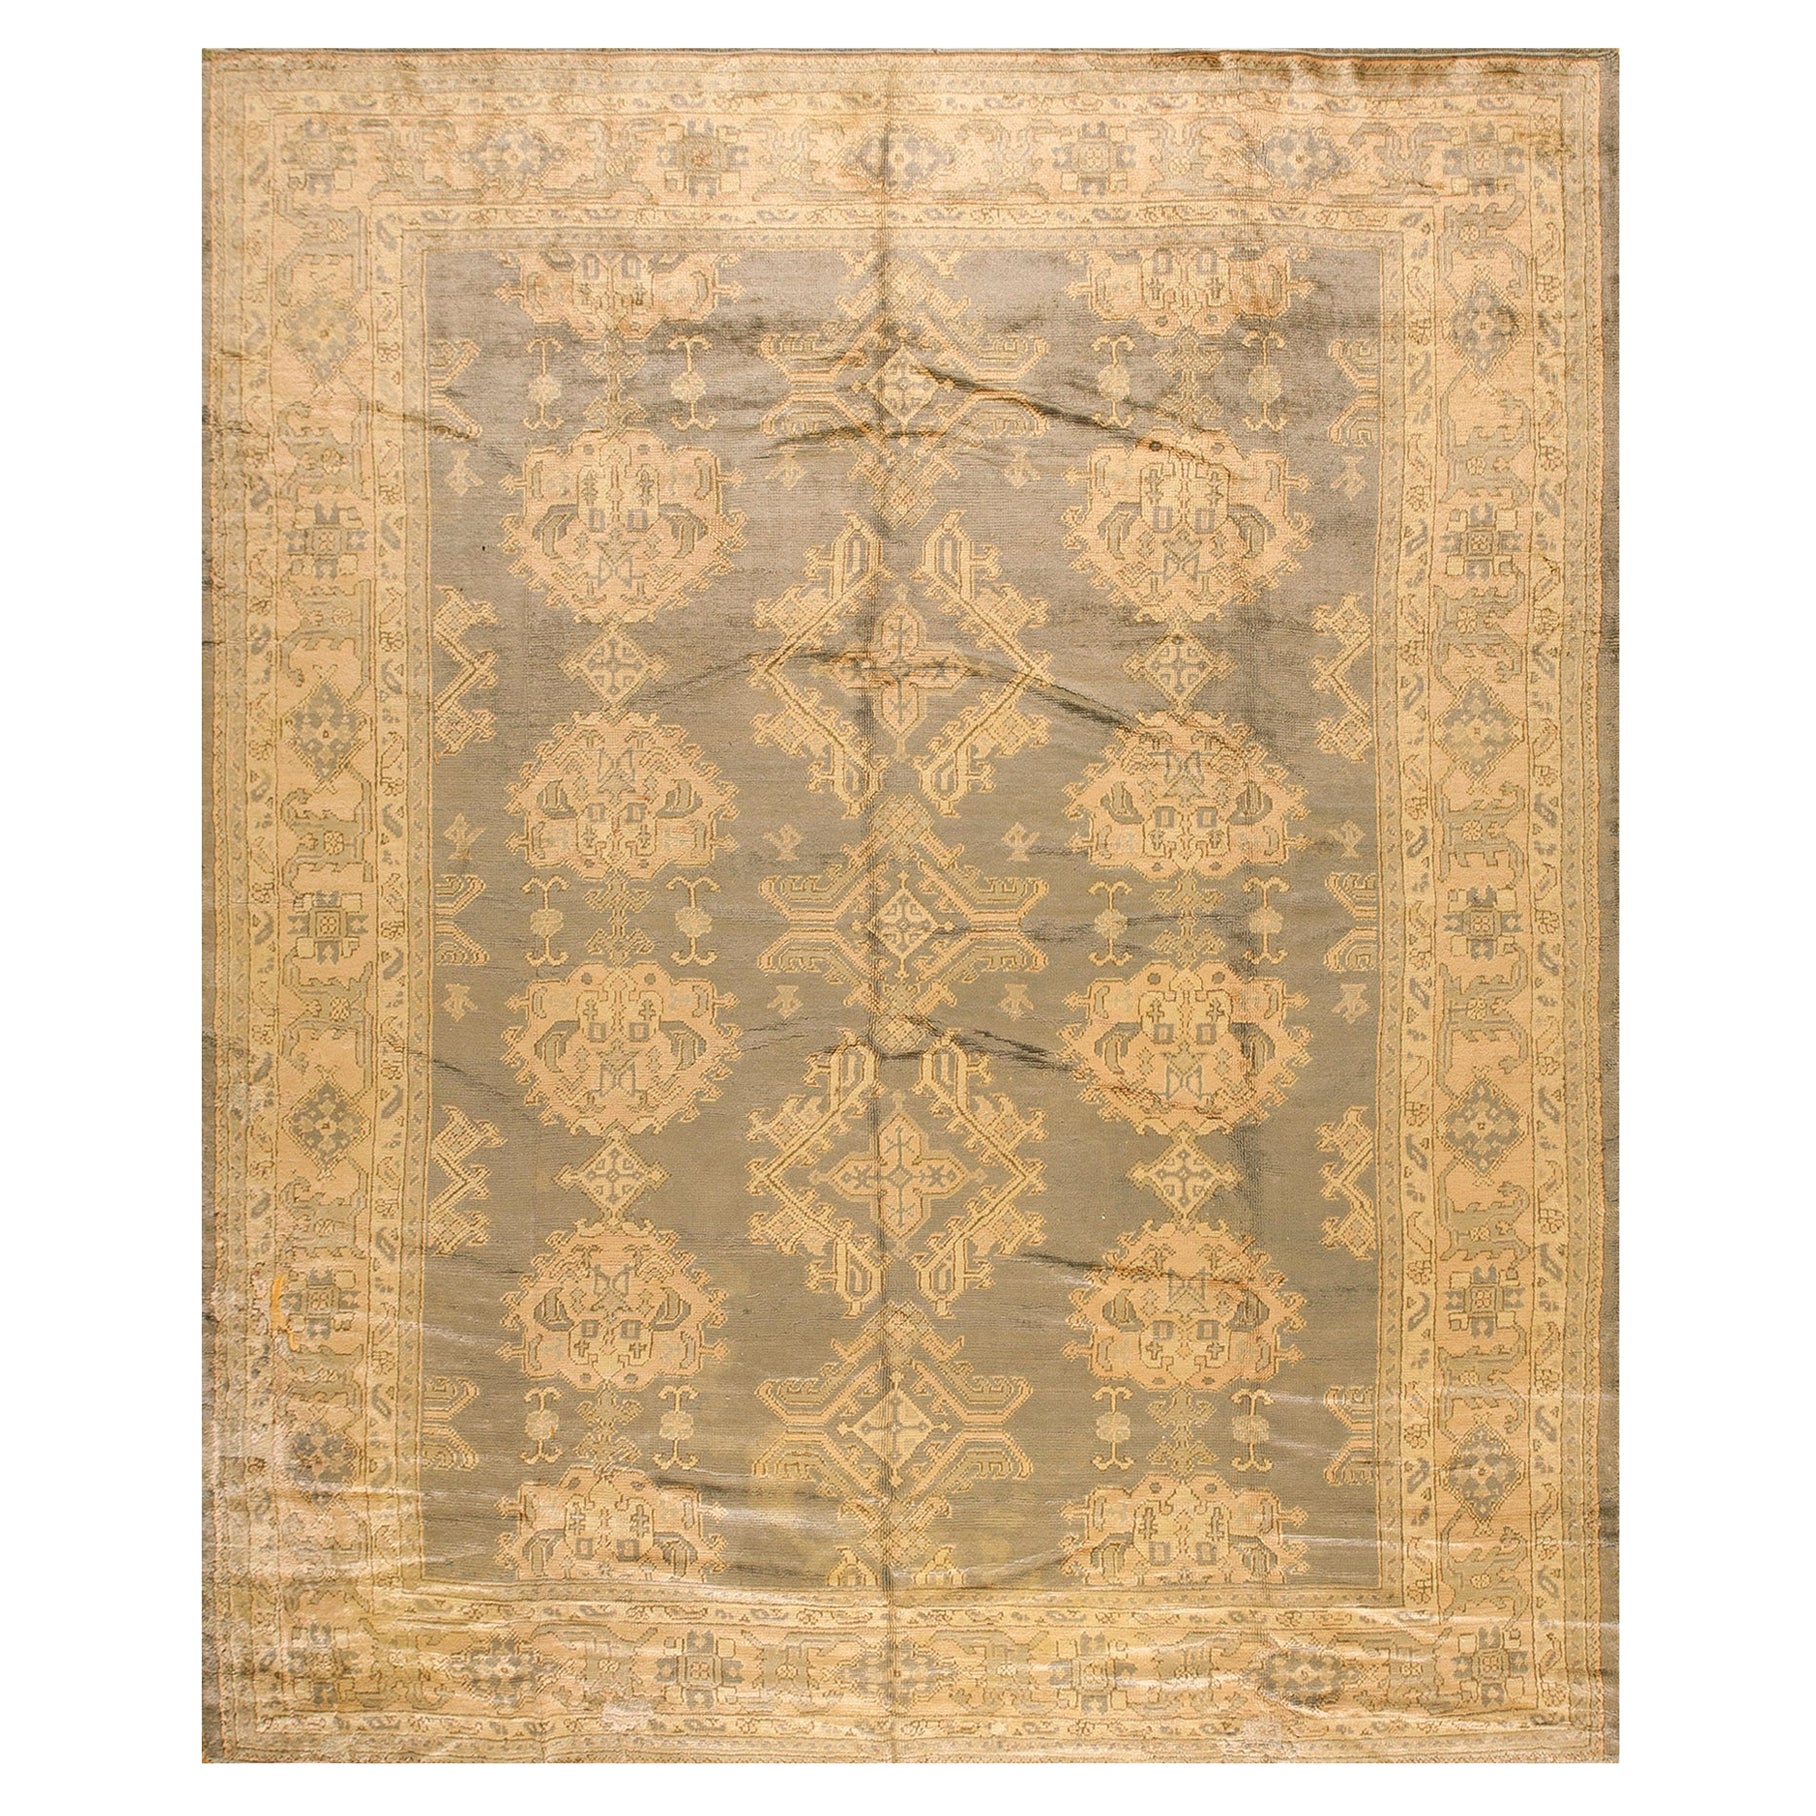 Early 20th Century Turkish Oushak Carpet ( 10' x 12'1'' - 305 x 368 ) For Sale